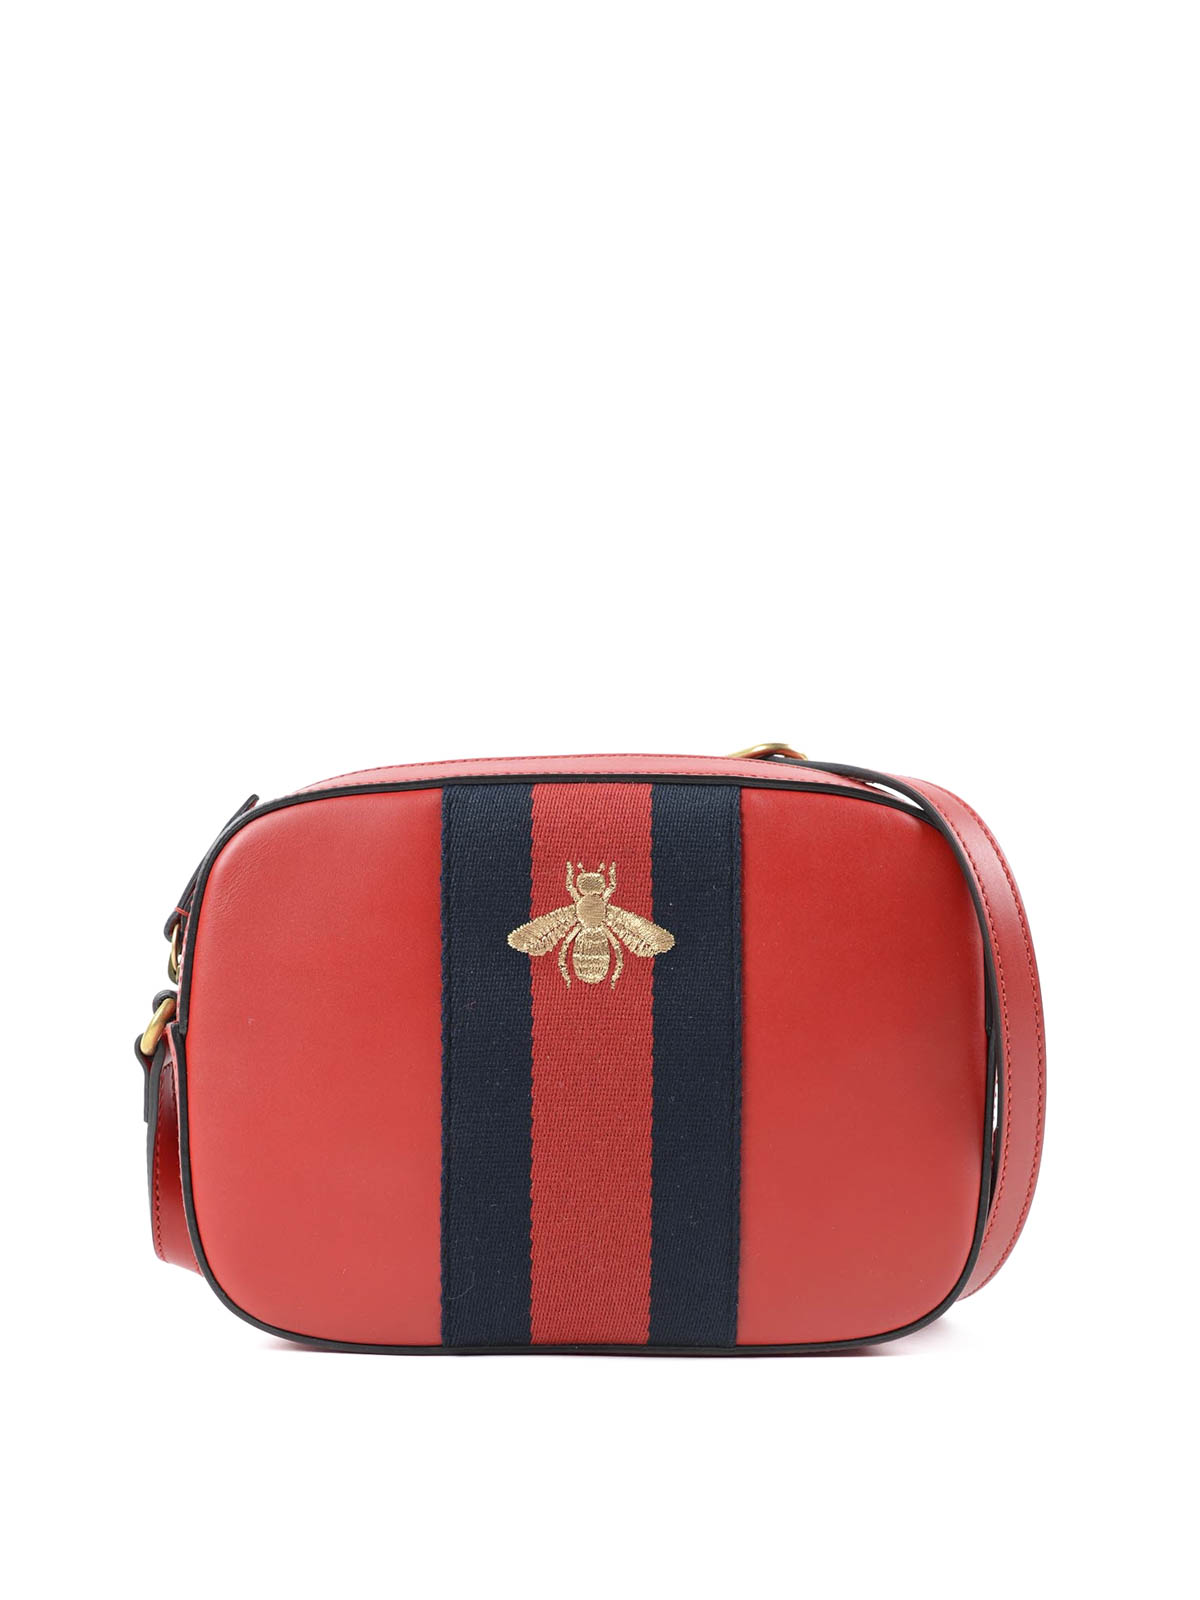 Gucci - Embroidered bee cross body bag - cross body bags - 412008 CVLBT 6495